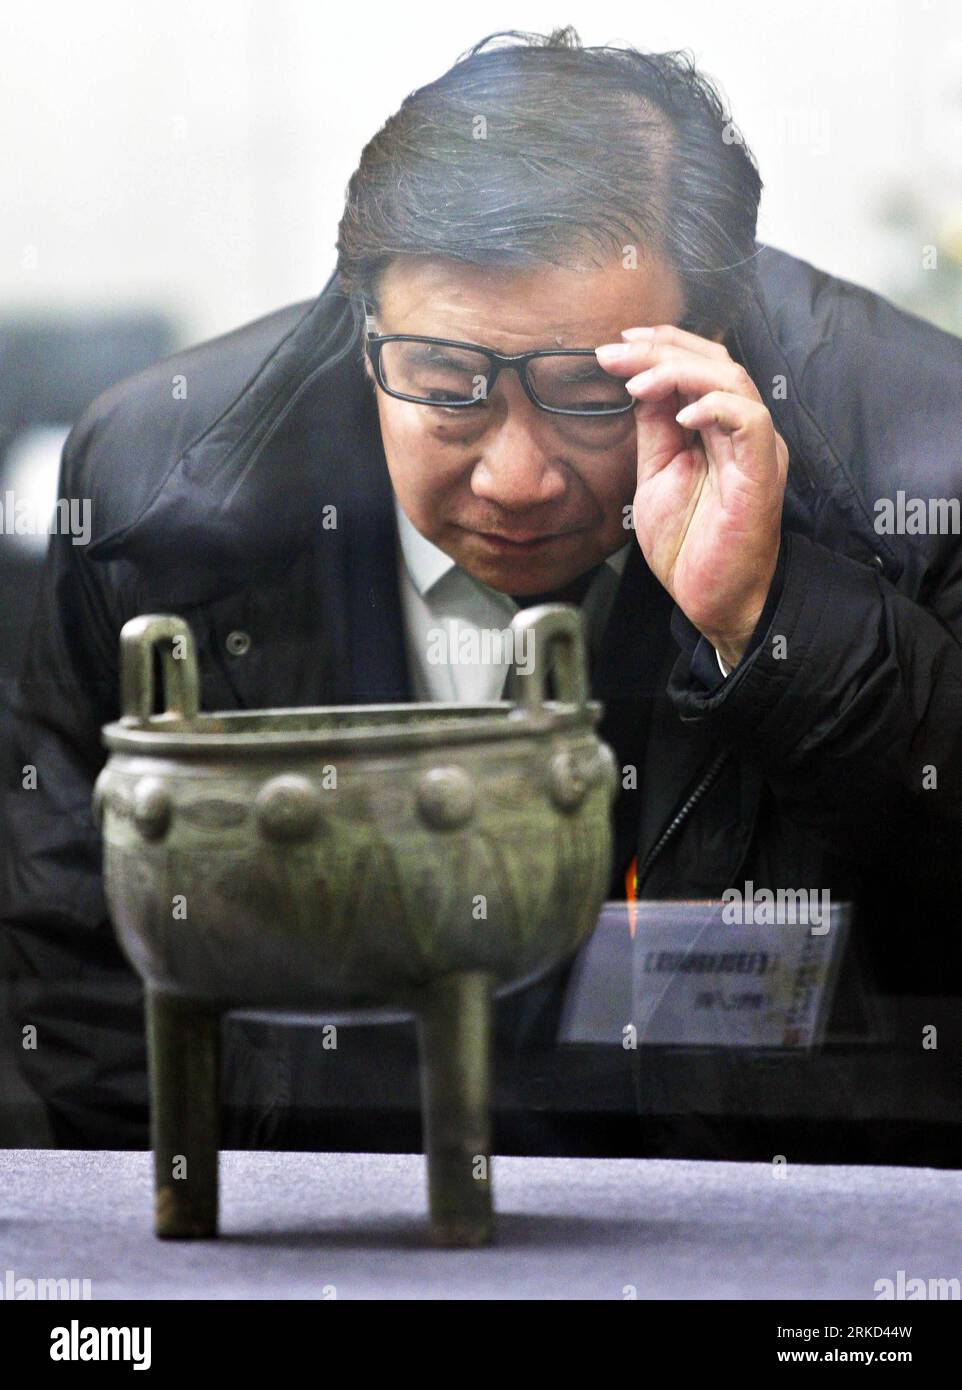 Bildnummer: 54858096  Datum: 20.01.2011  Copyright: imago/Xinhua (110127) -- BEIJING, Jan. 27, 2011 (Xinhua) -- A tourist views an artwork from China s Palace Museum in Art Treasures Museum of the Chinese Nation in Beijing, capital of China, Jan. 20, 2011. China s Palace Museum, located inside the Forbidden City, announced on Wednesday that a seven-year inventory, which began in 2004, reveals the museum s collection includes 1,807,558 objects, providing the first accurate appraisal of the size of the museum s collection. (Xinhua/Zhang Chuandong) (ly) CHINA-BEIJING-PALACE MUSEUM-COLLECTION-APPR Stock Photo